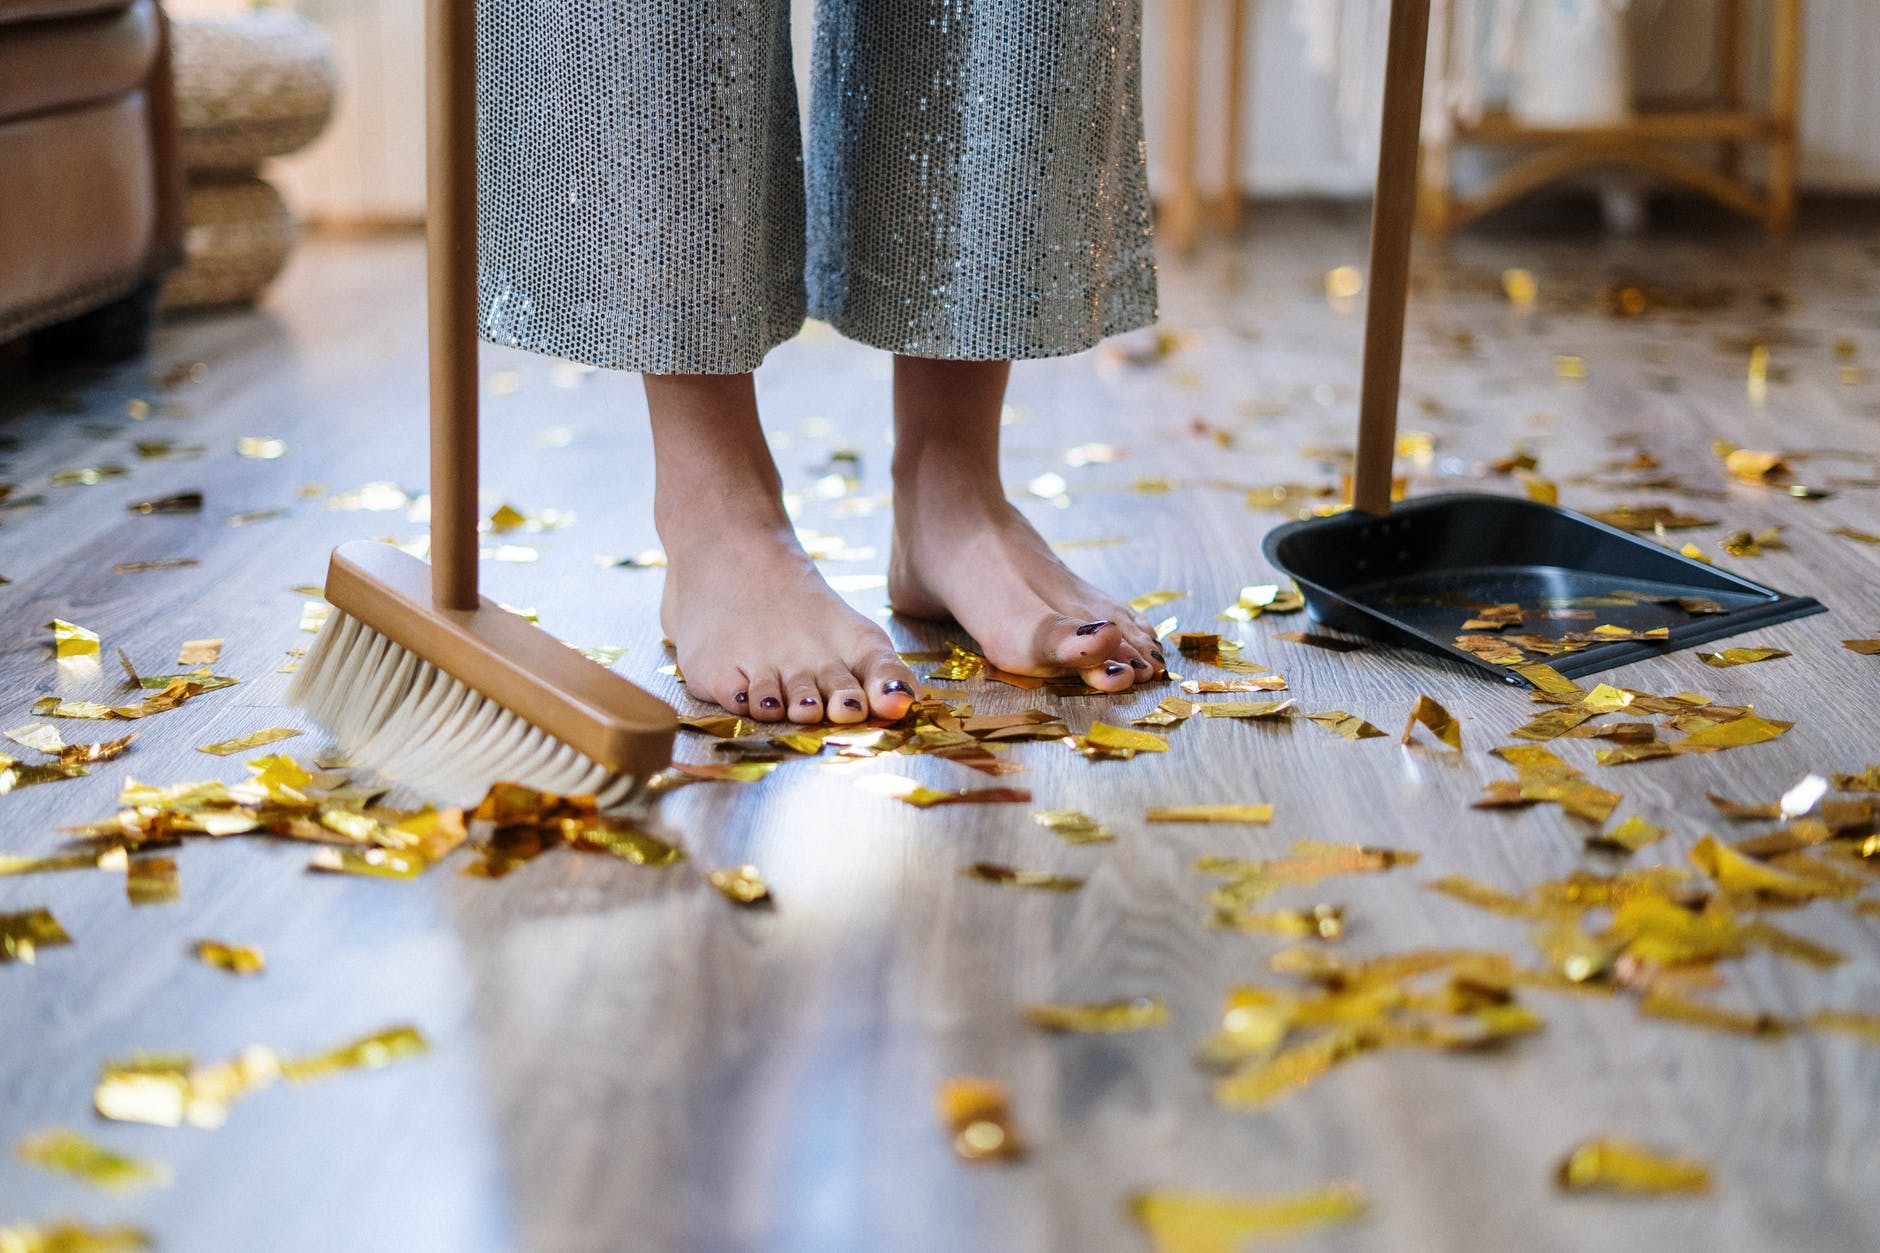 How Cleaning Your Home Can Help Clean Your Mind